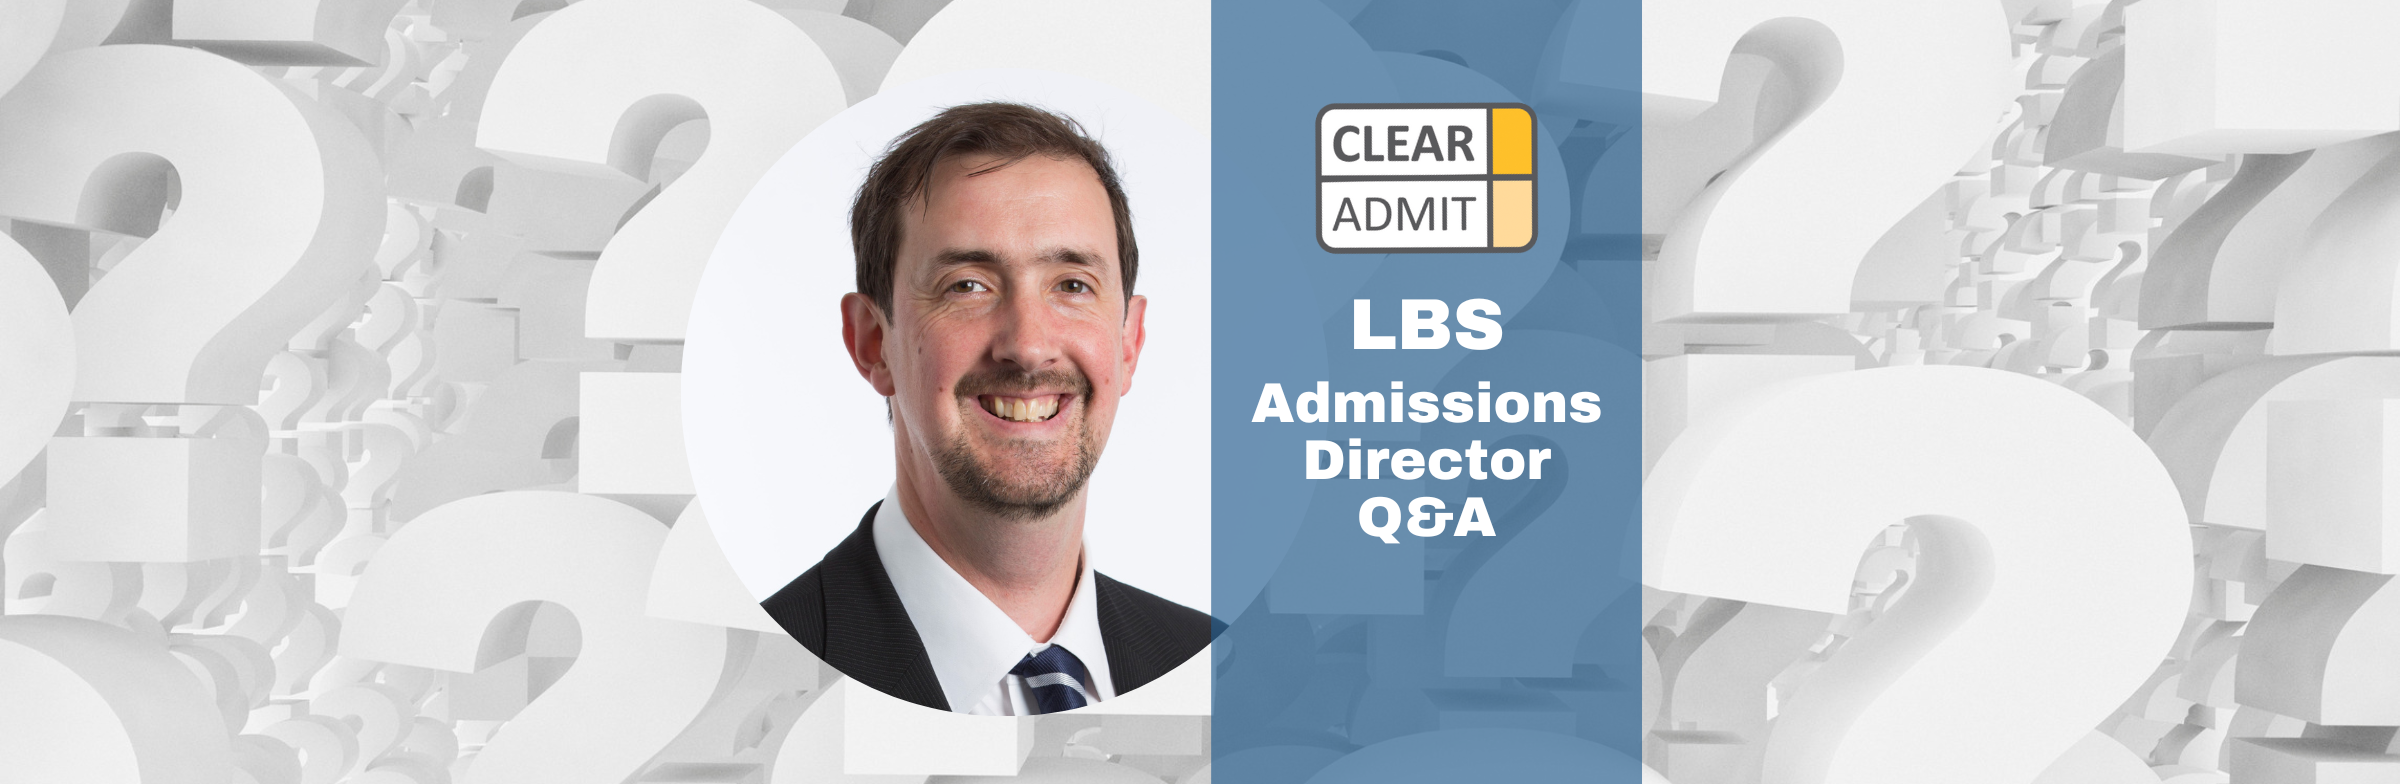 Image for Admissions Director Q&A: David Simpson of LBS